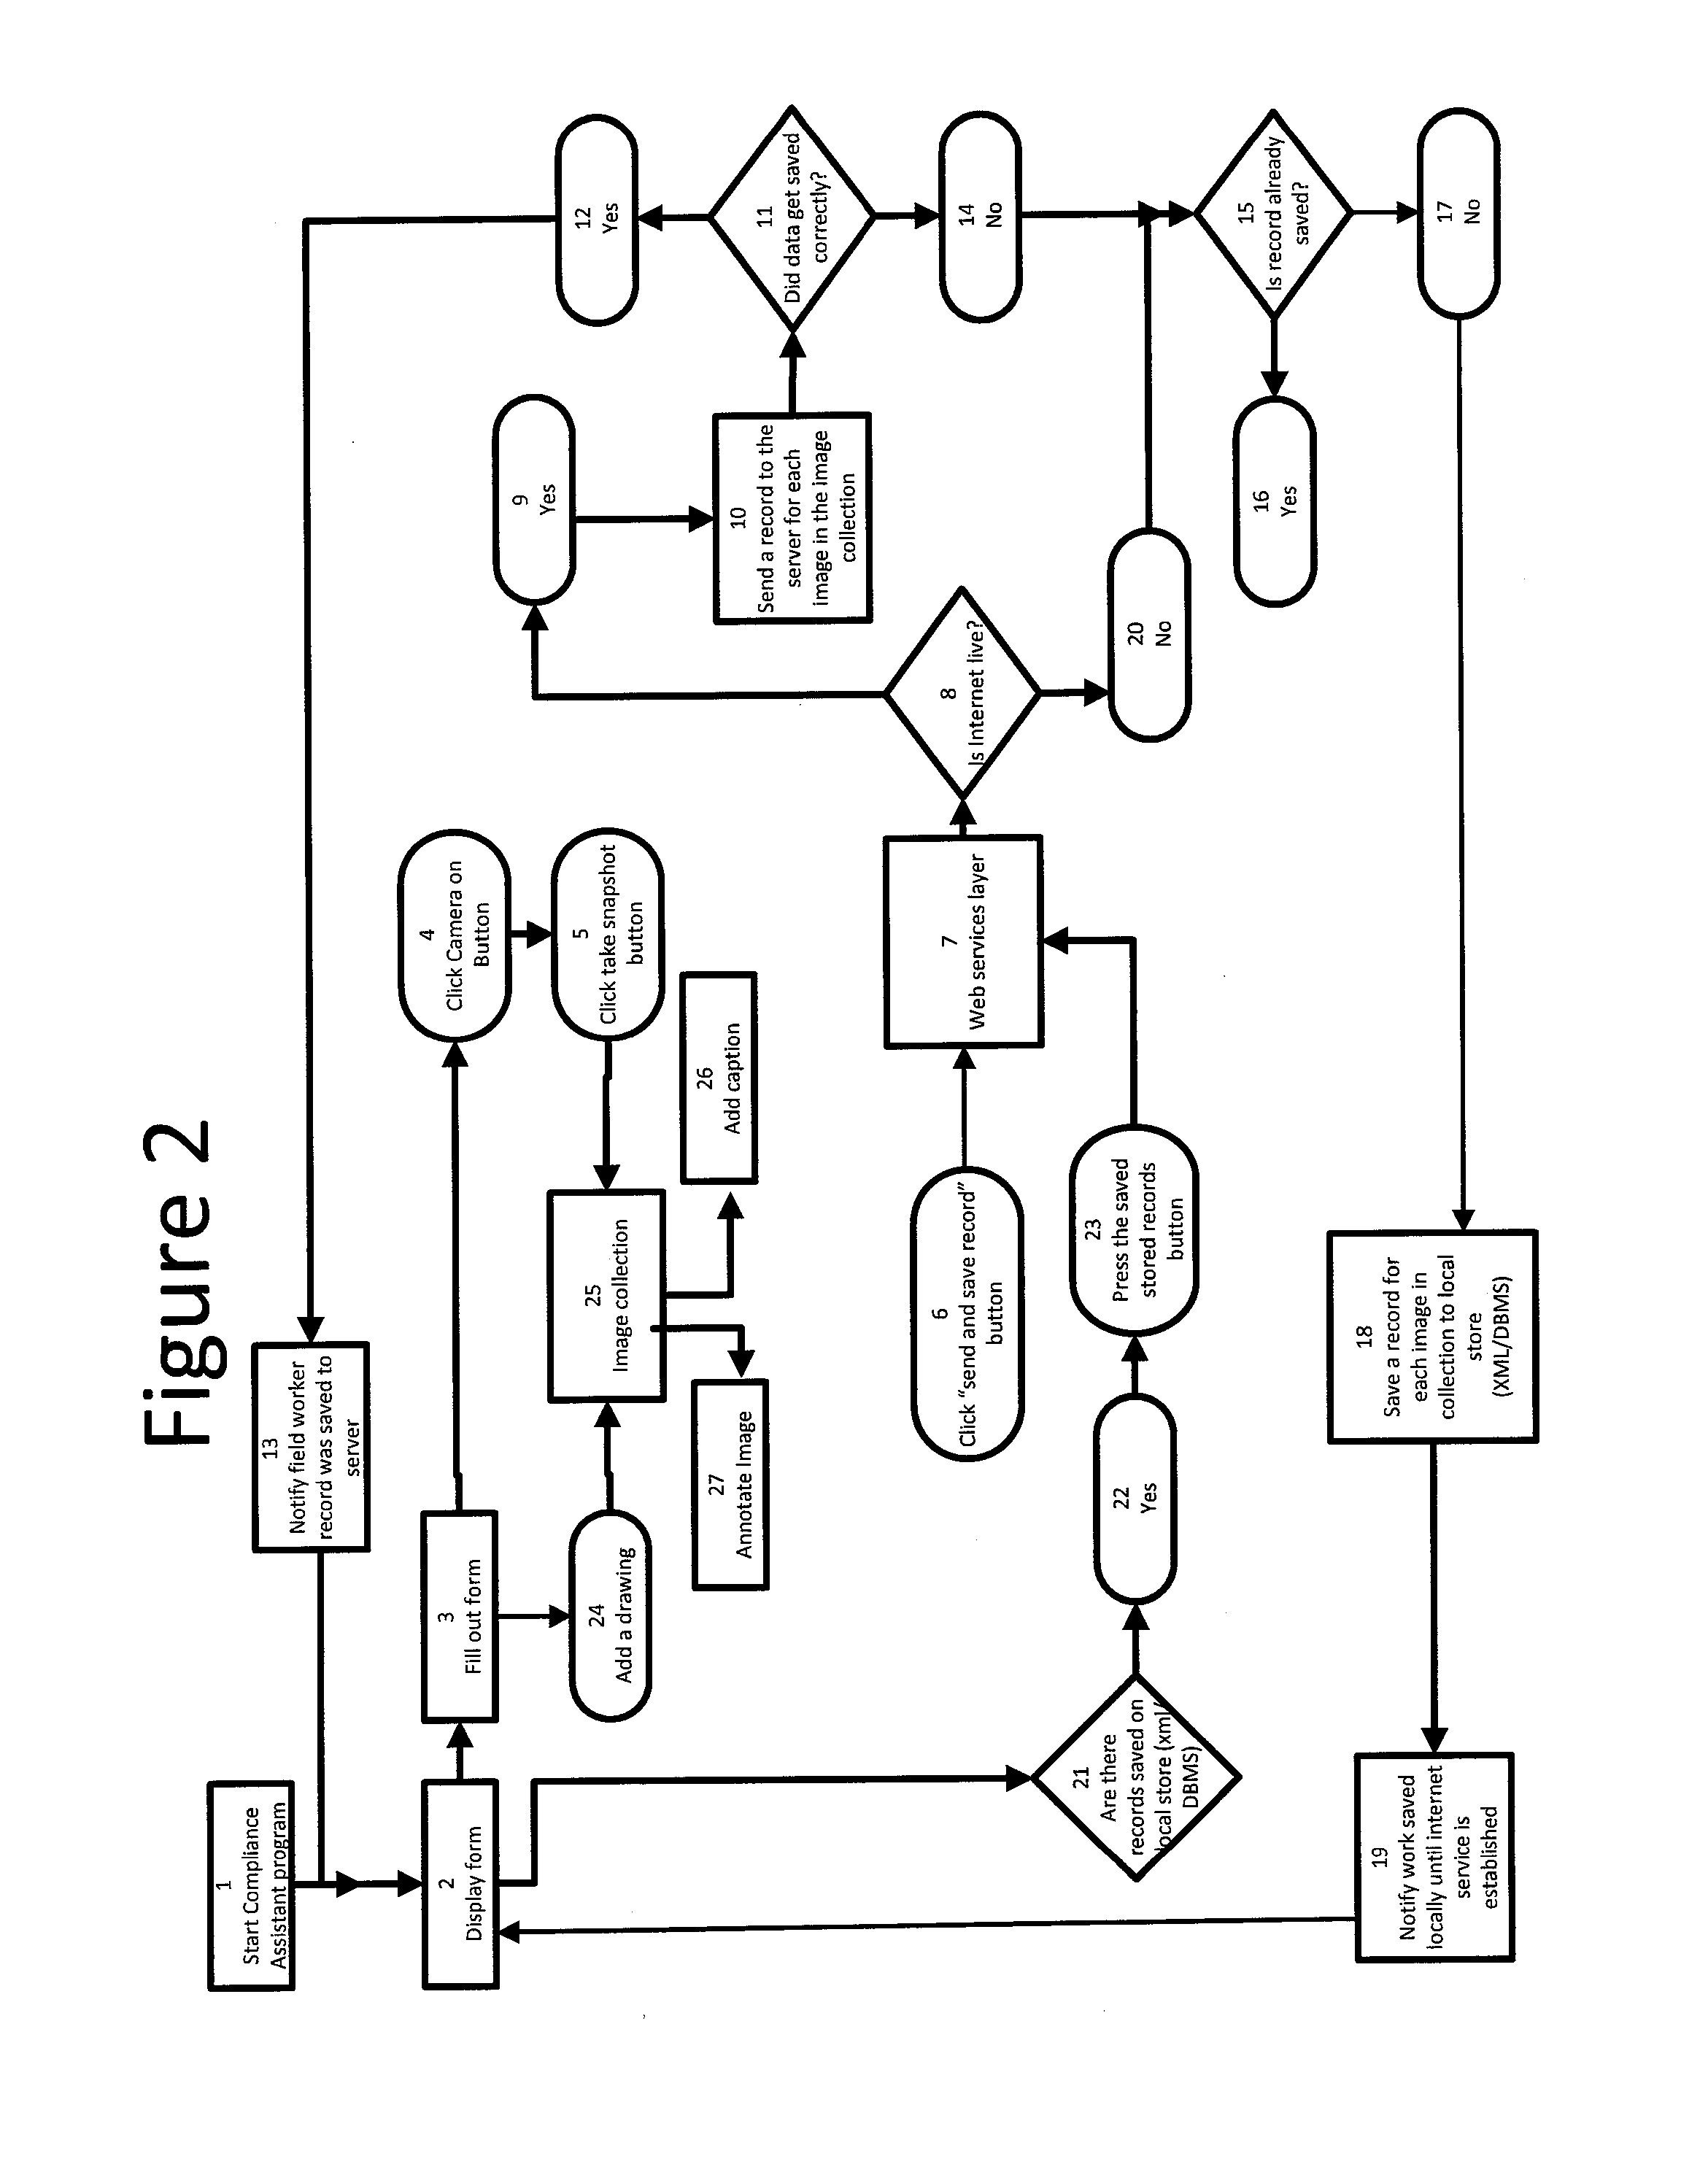 Computer-implemented system and method for conducting field inspections and generating reports